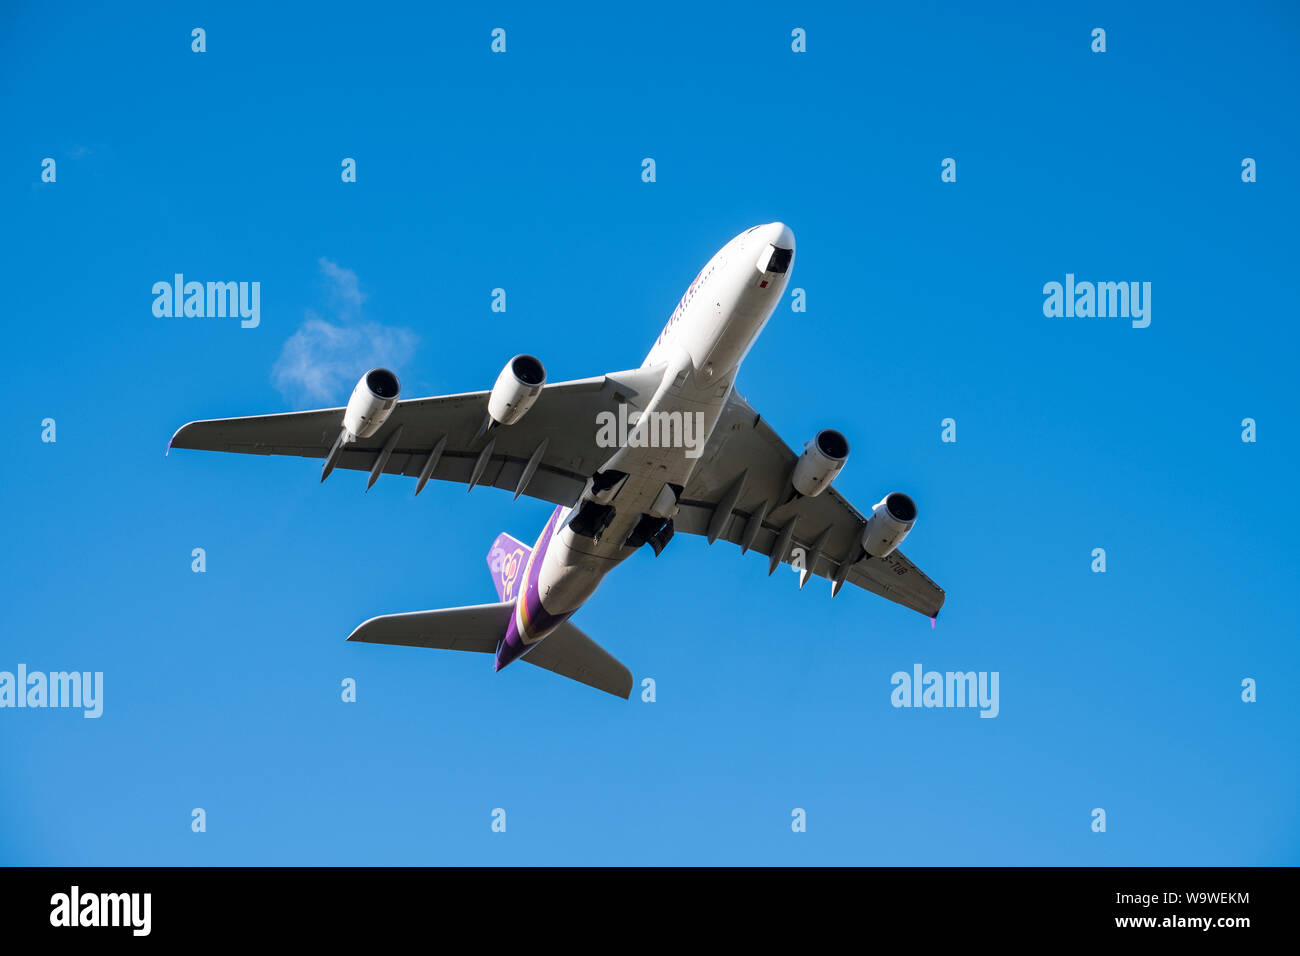 Thai Airways Airbus A380-841 jet taking off from Heathrow Airport, London, England, GB, UK Stock Photo